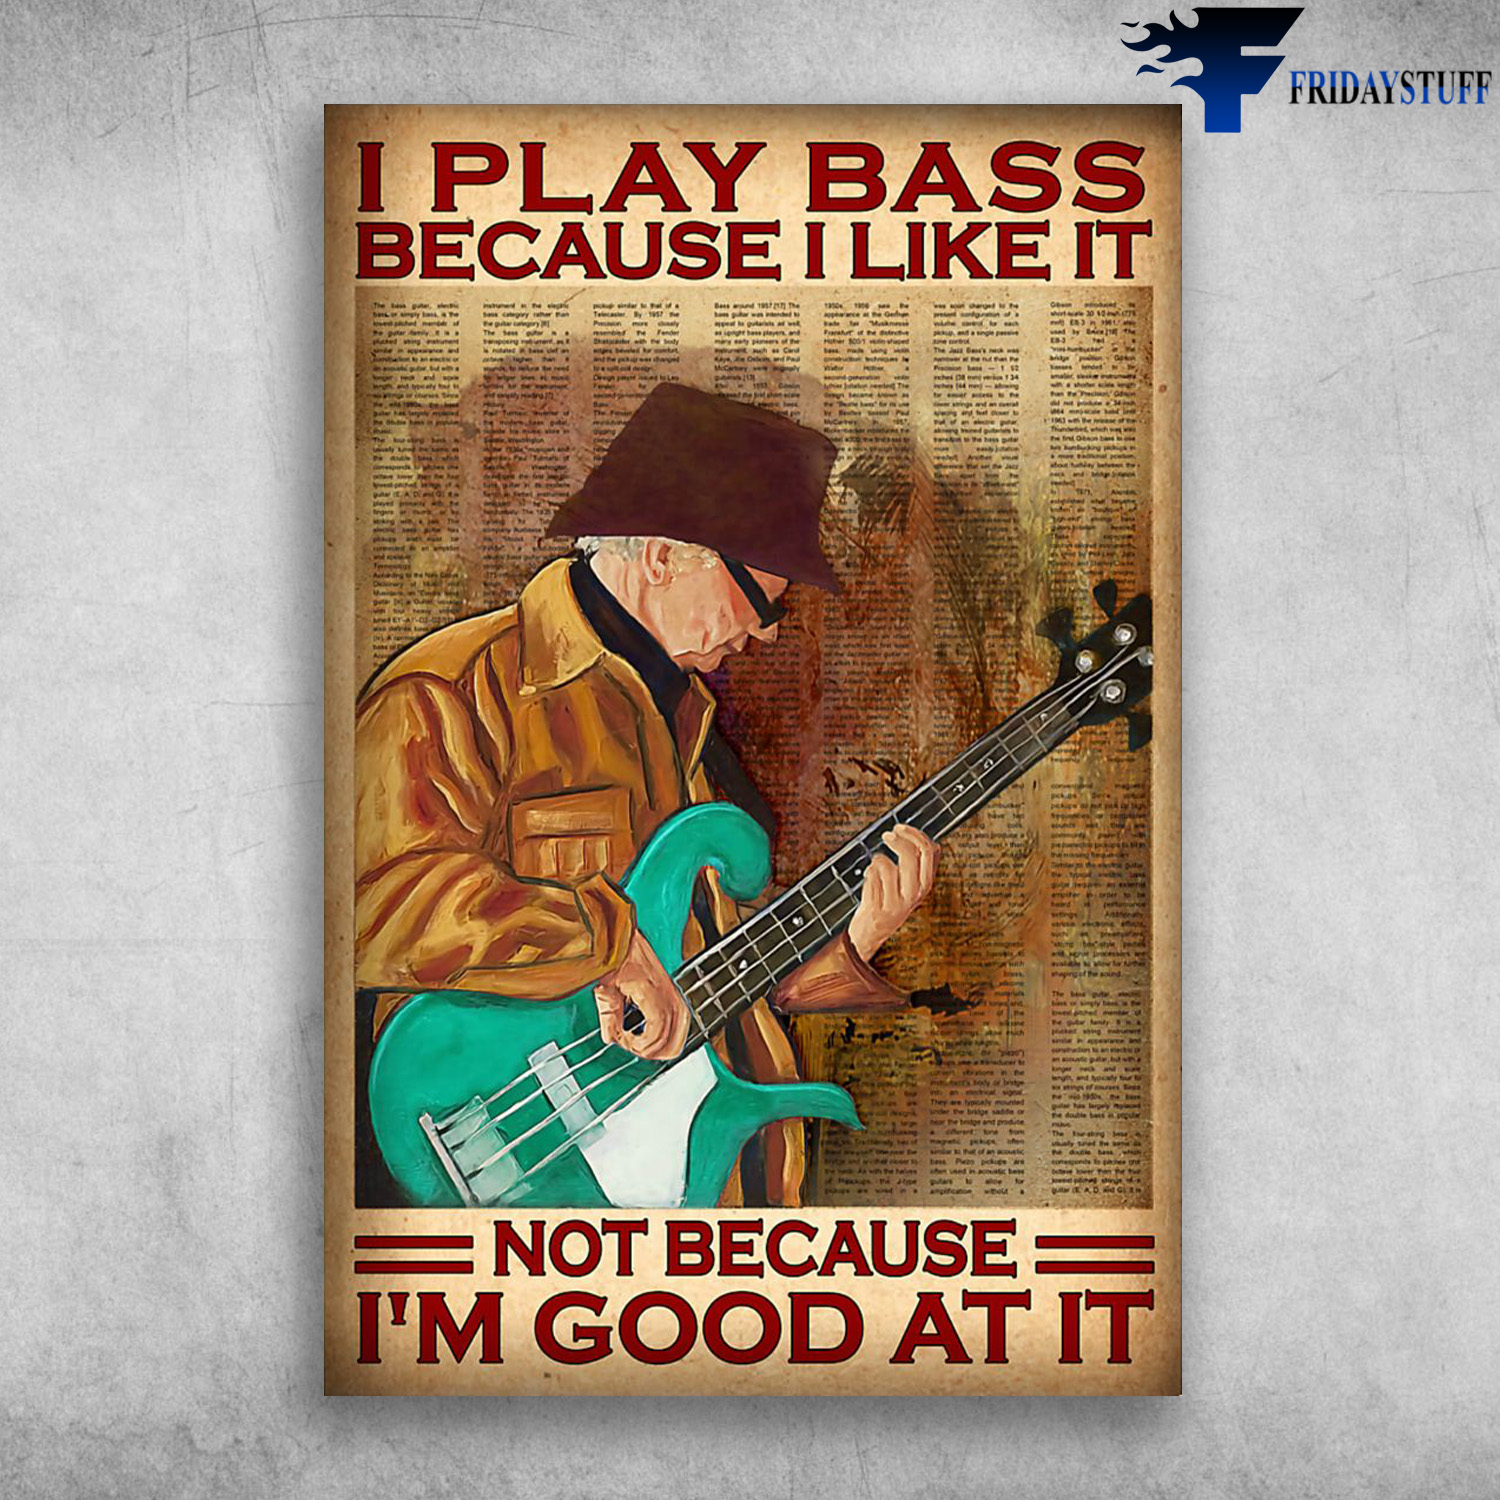 Old Man Play The Bass - I Play The Bass, Because I Like It, Not Because I'm Good At It